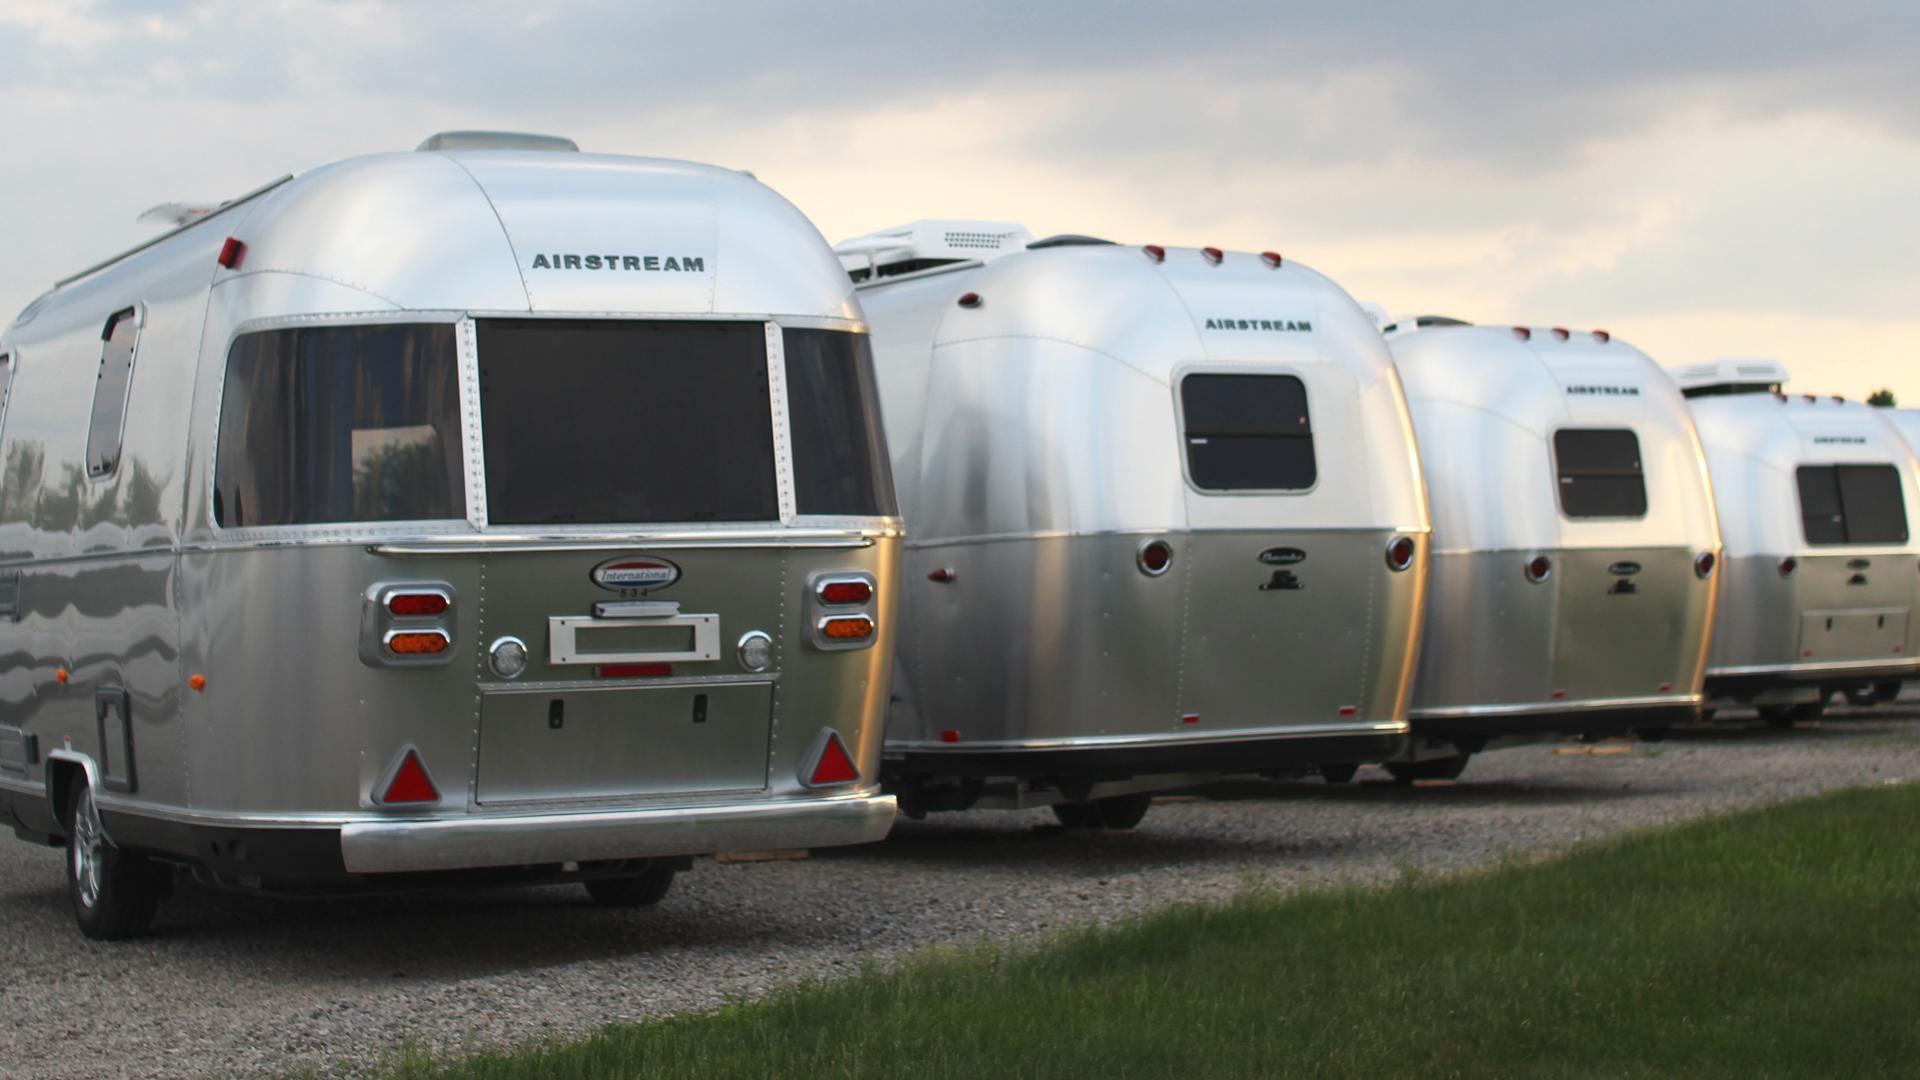 row of airstream trailers parked